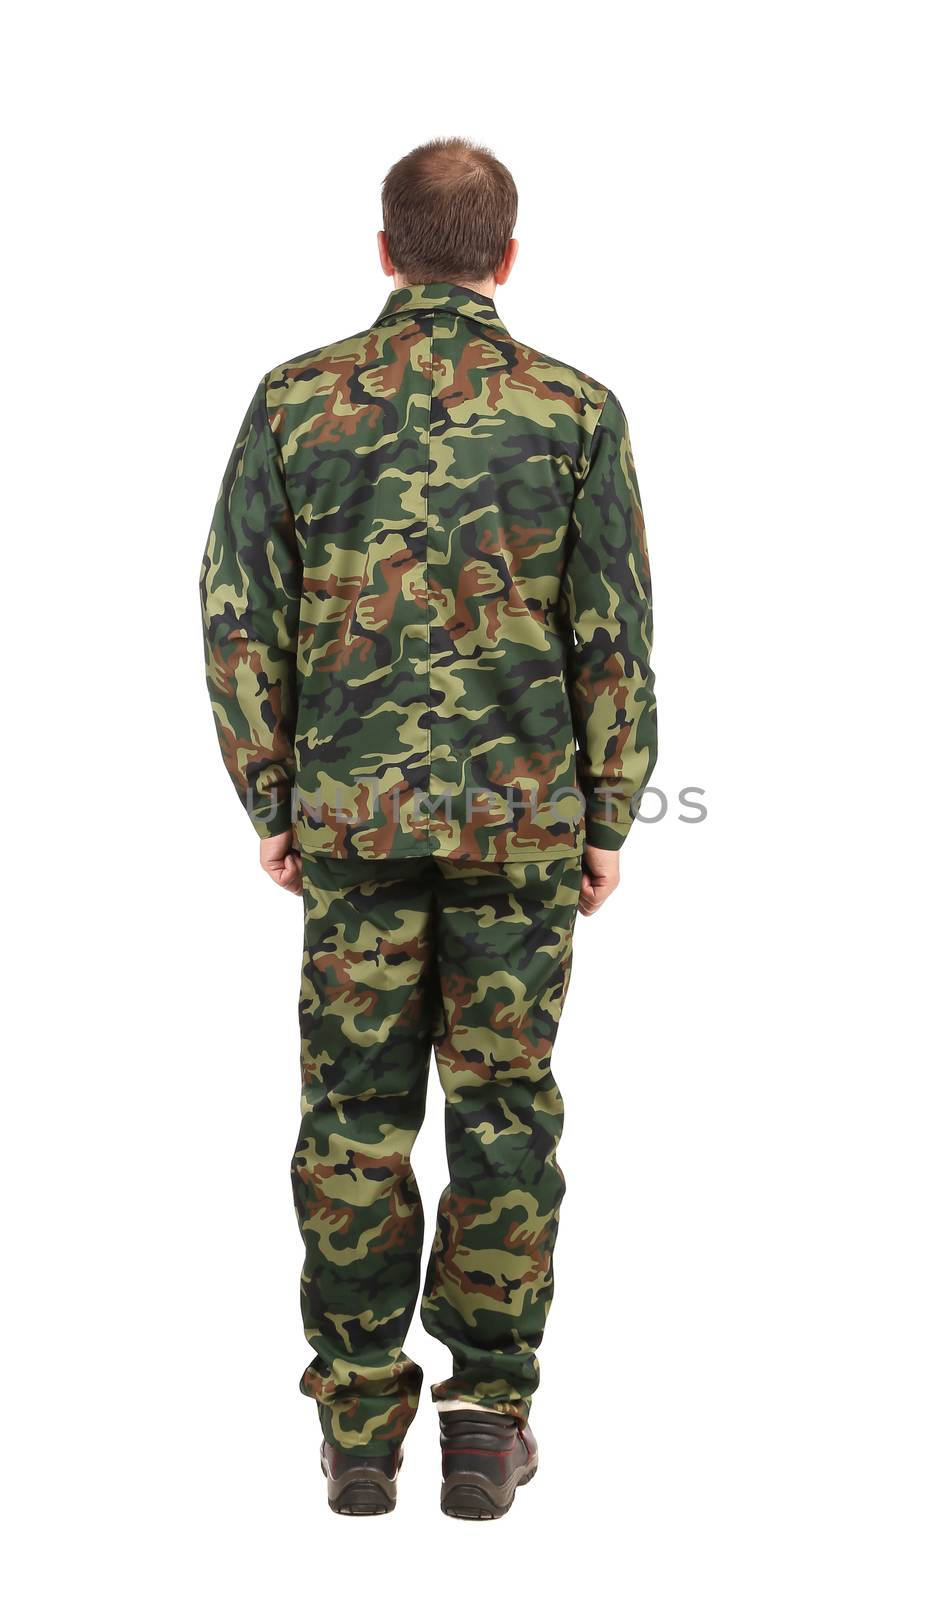 Back view of man in military suit. Isolated on a white background.